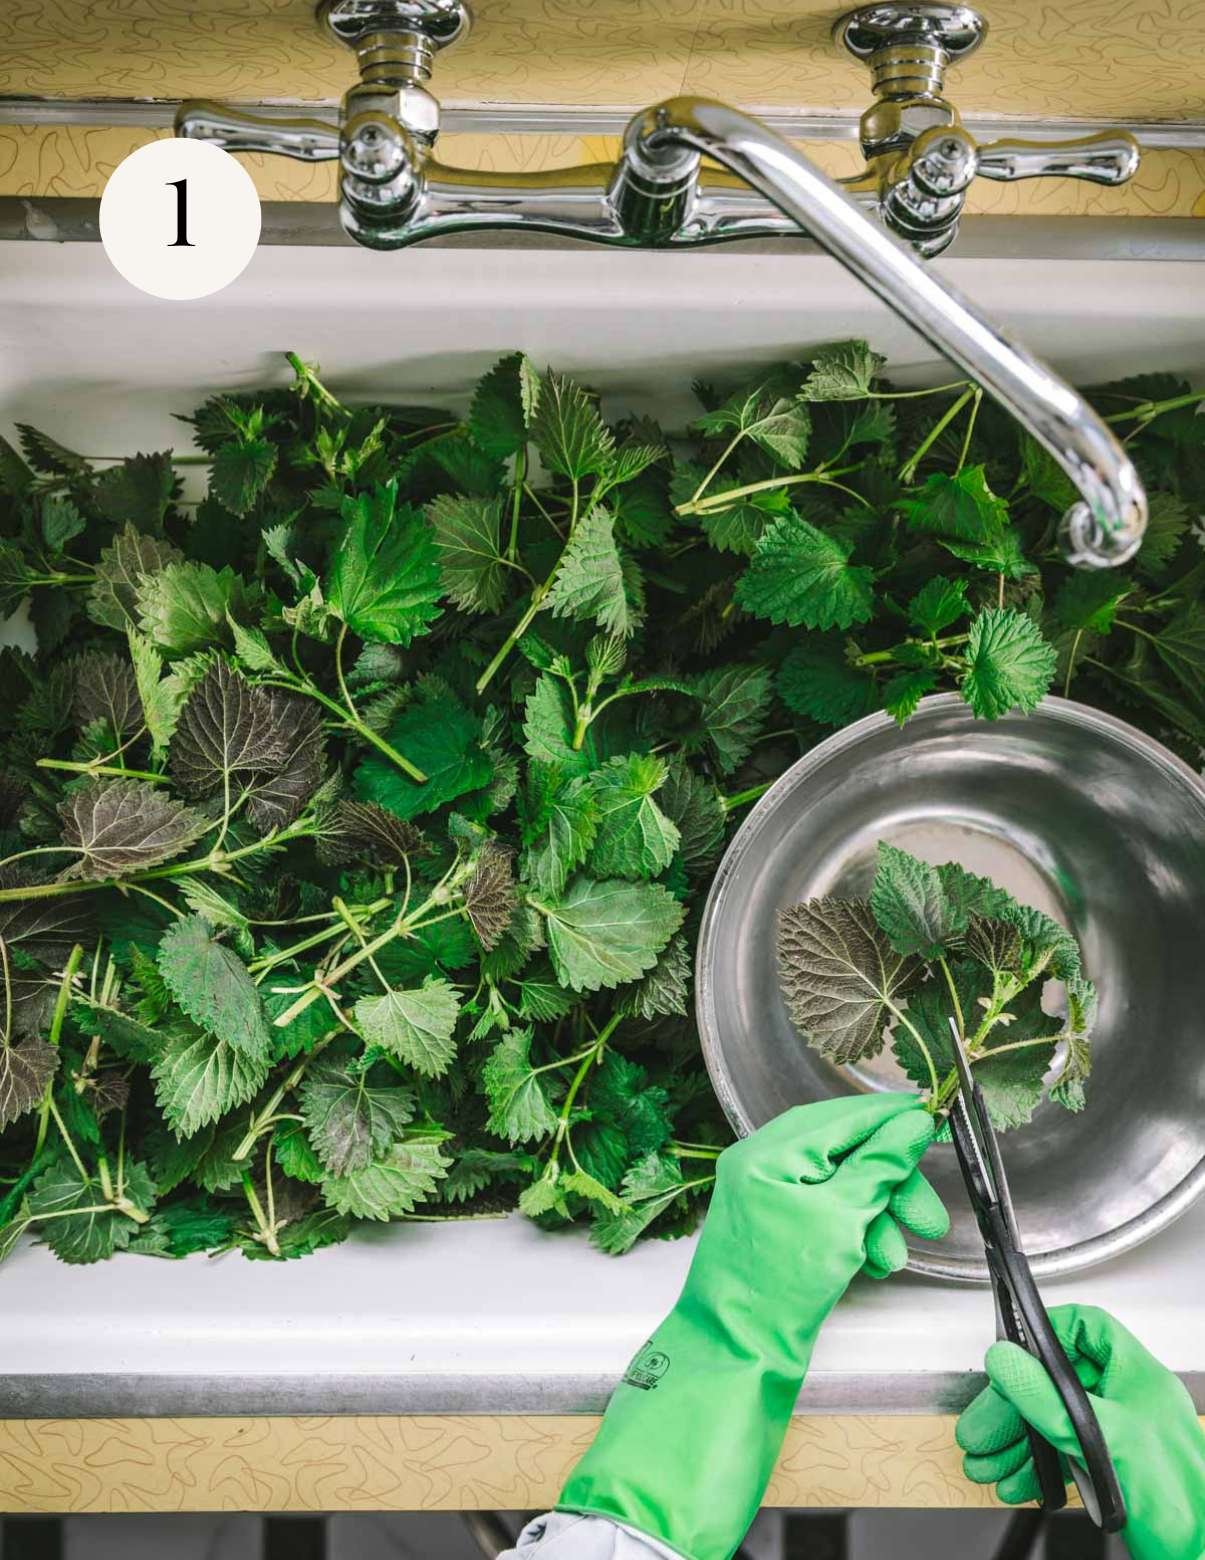 Stinging nettle leaves in a sink.